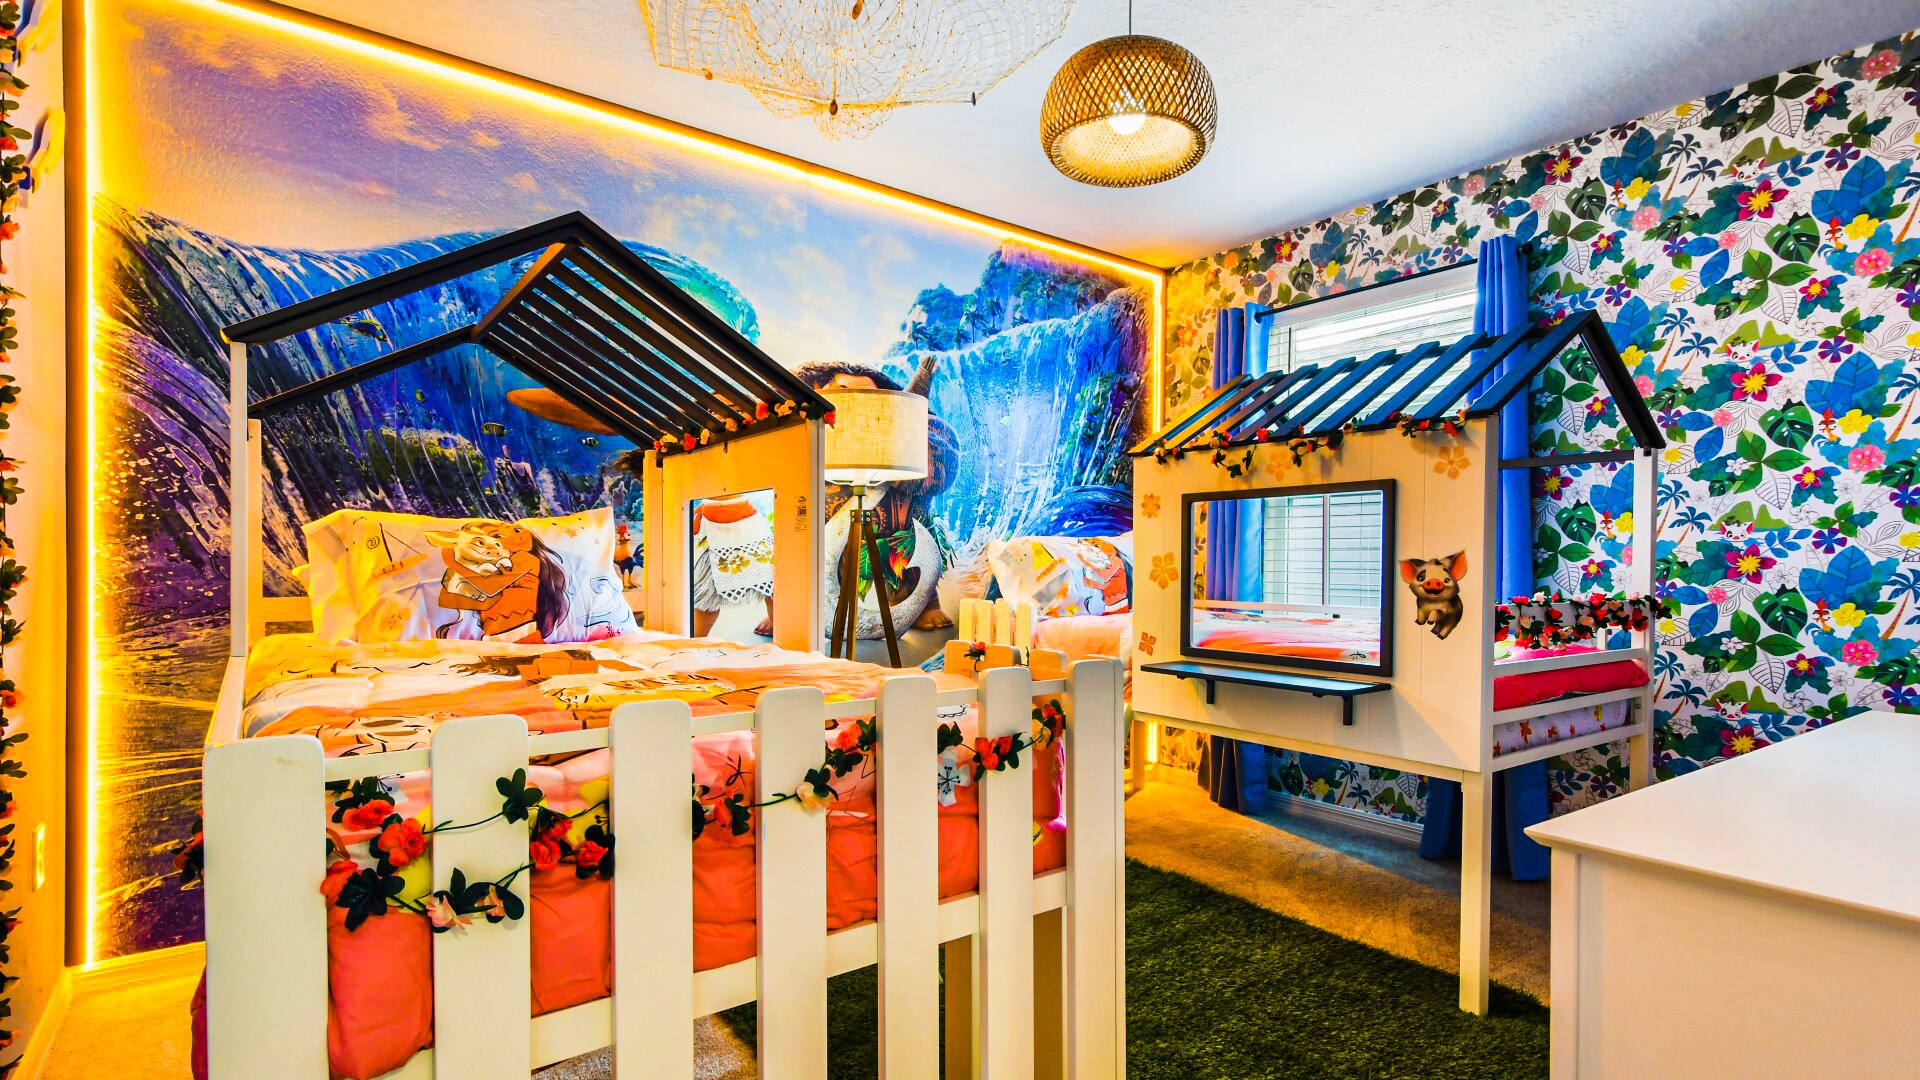 Kids will love the upstairs bedroom with a exclusive Moana theme